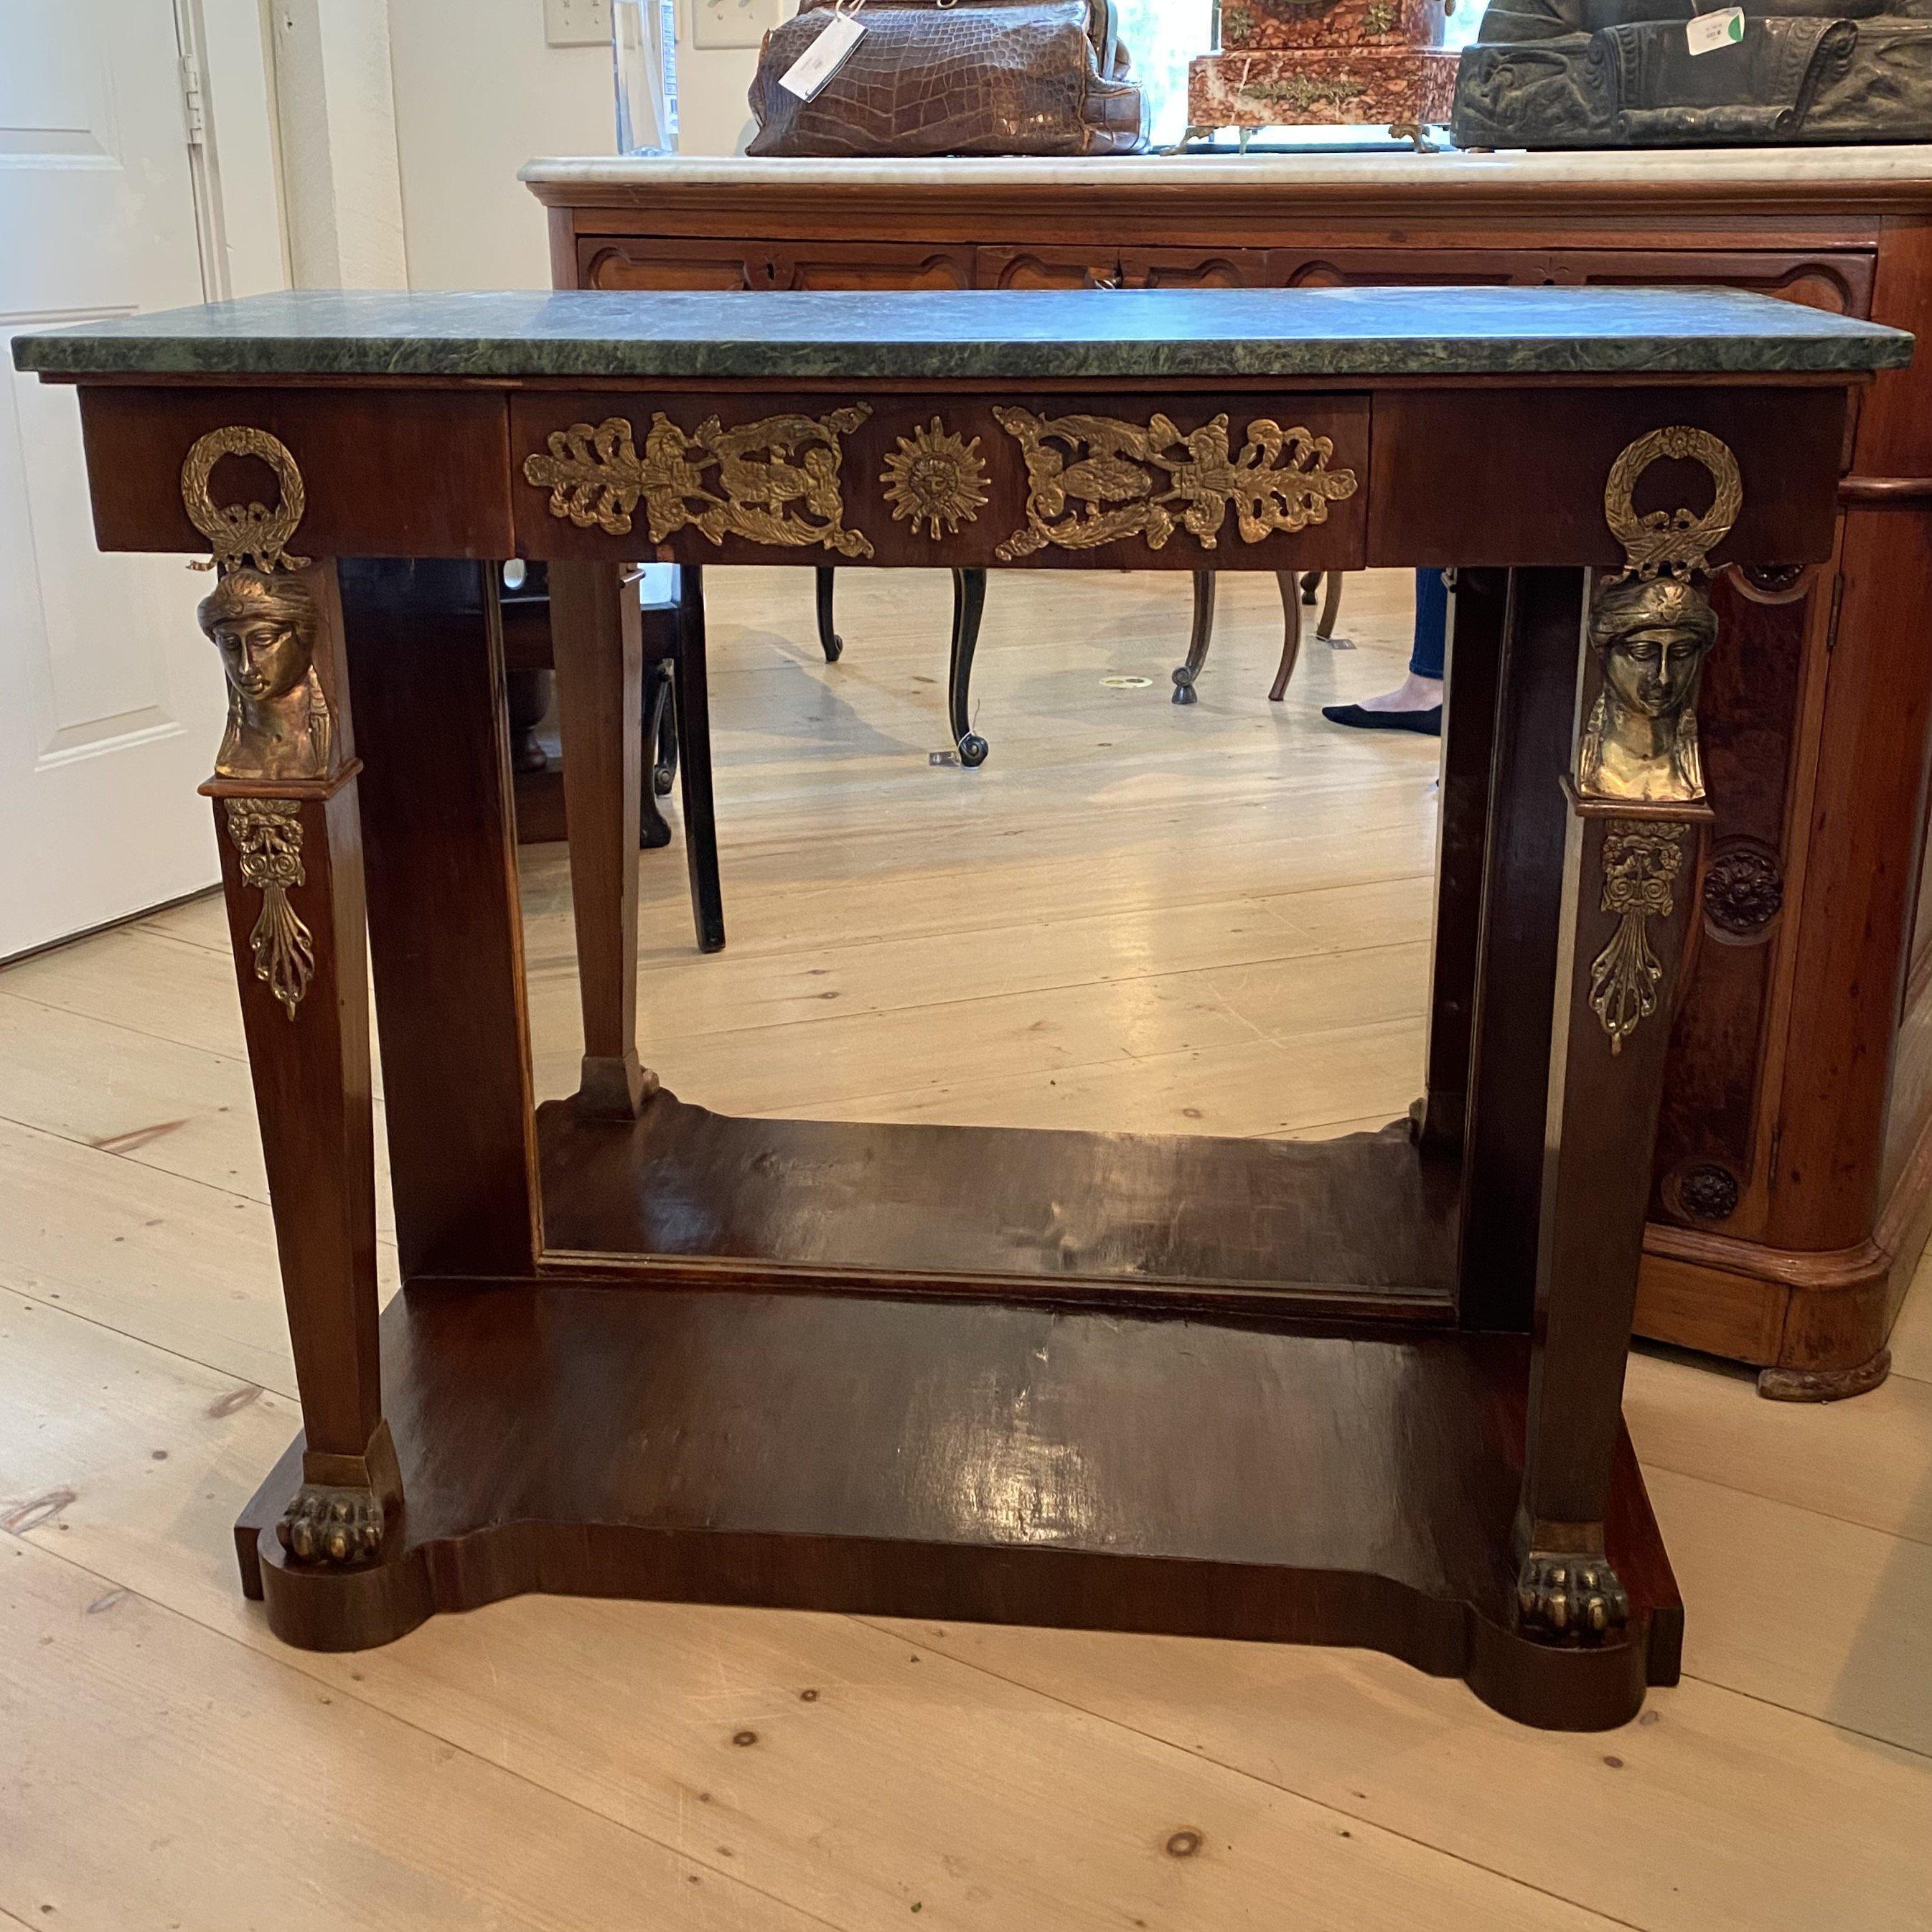 Fine French early 20th century mahogany neoclassical console or pier table having beautiful green marble top with molded edge over center drawer with bronze embellishments. The legs have bronze caryatids on top, ebonized tapering form and bronze